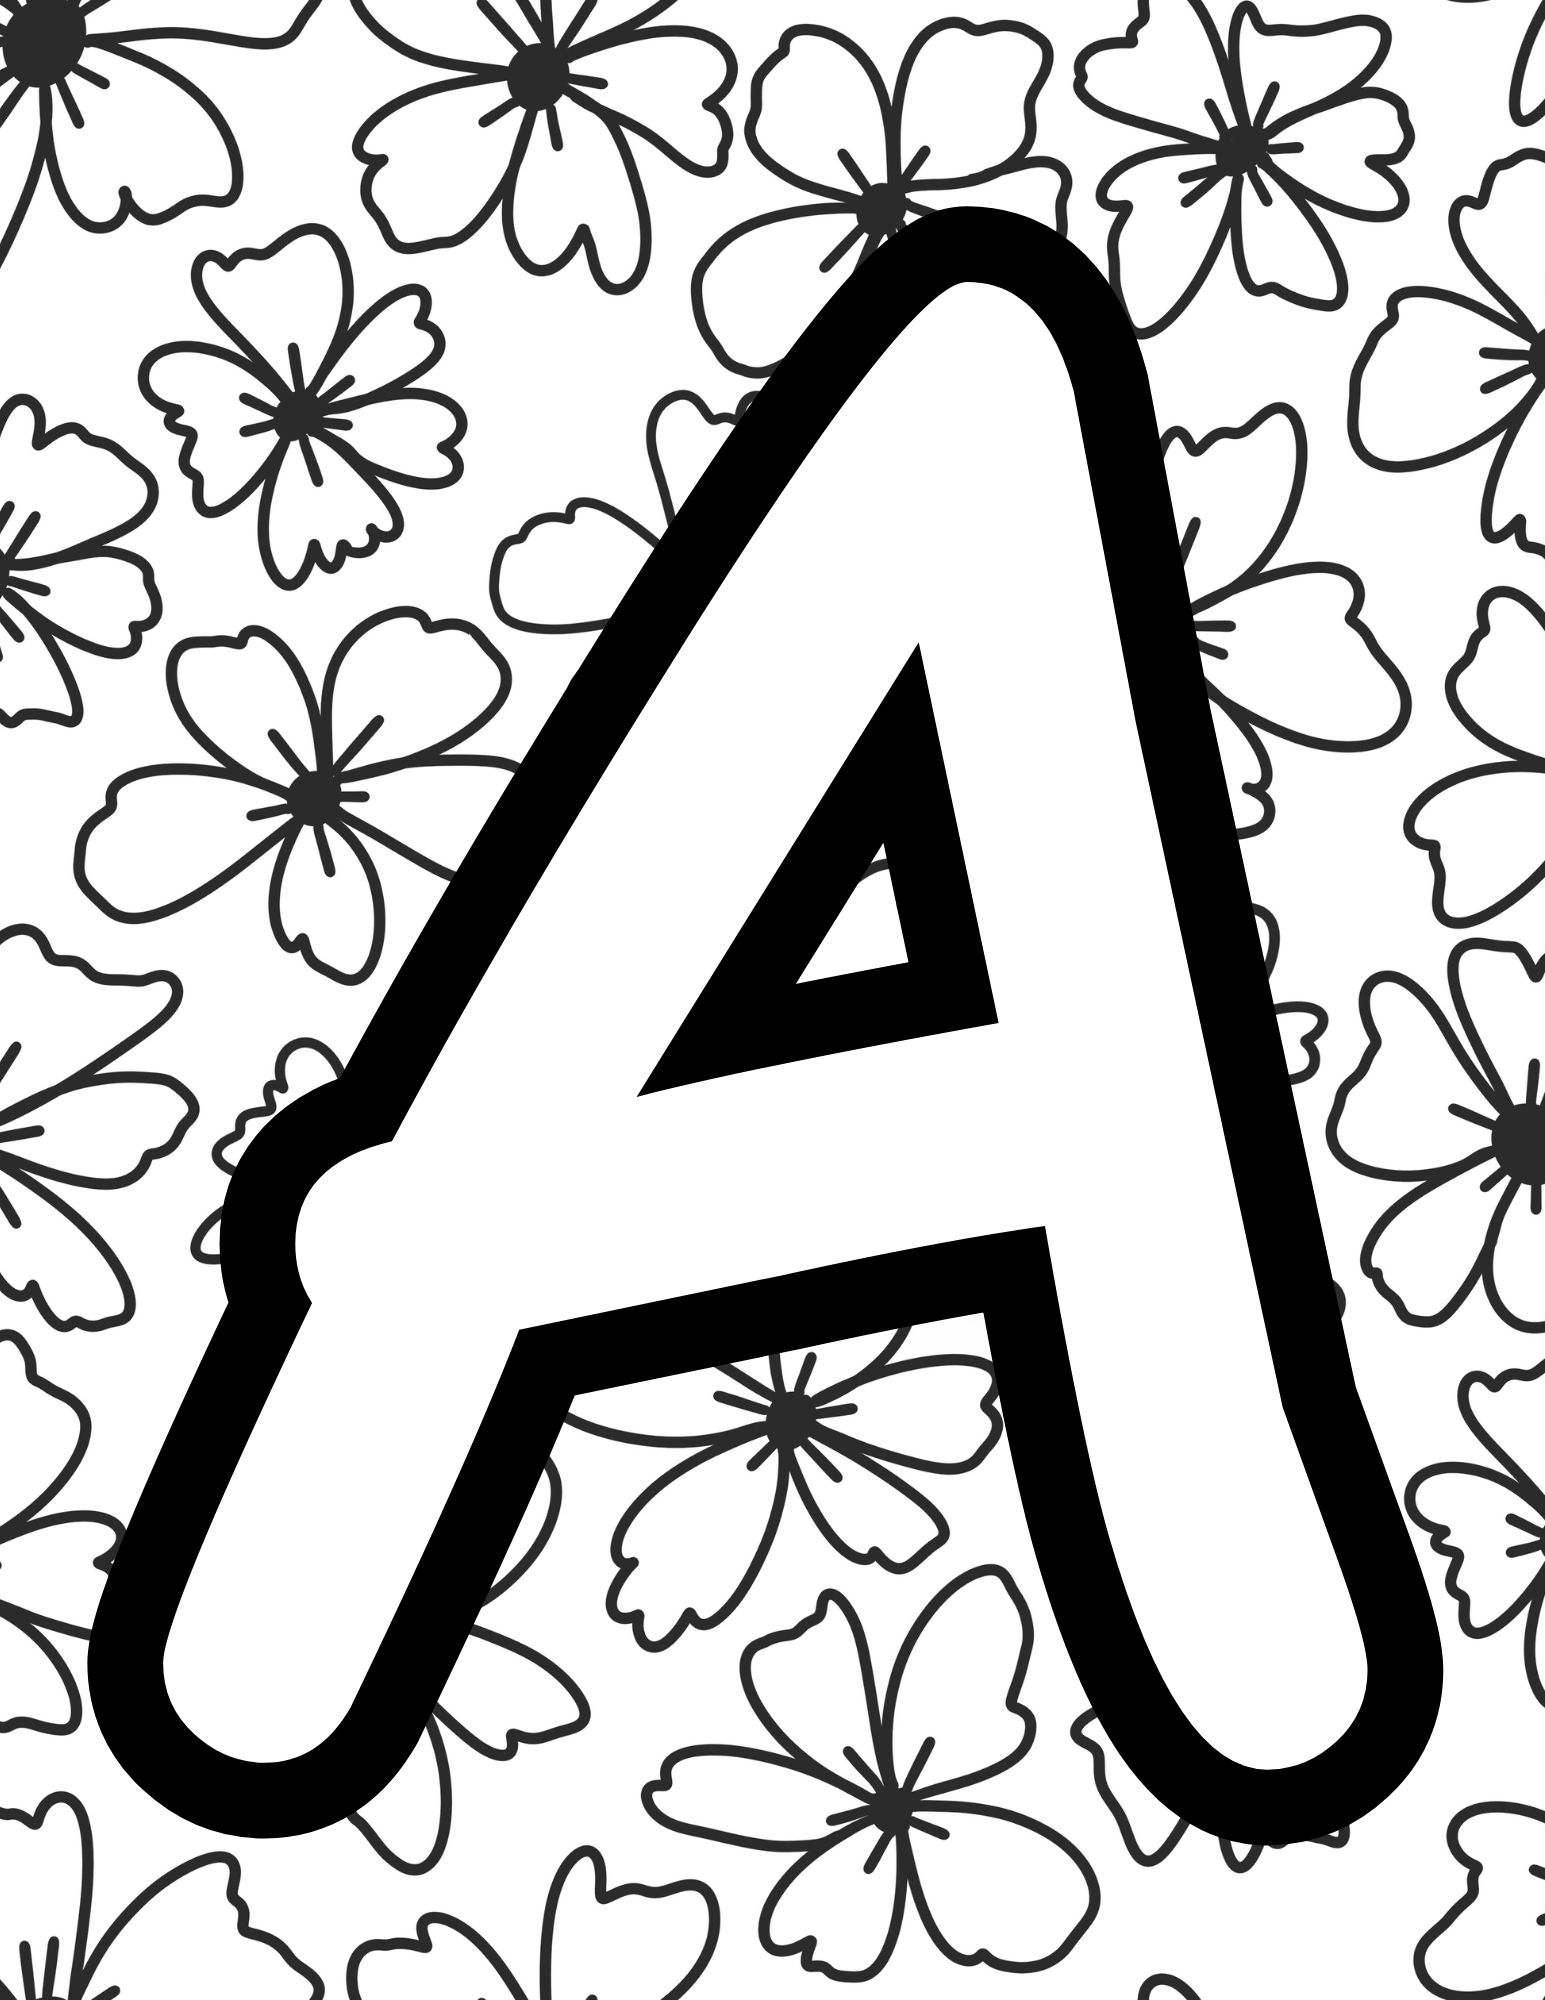 Free Printable ABC Coloring Pages Learn Alphabet Letters Skip To My Lou - Free Printable Alphabet Letters To Color